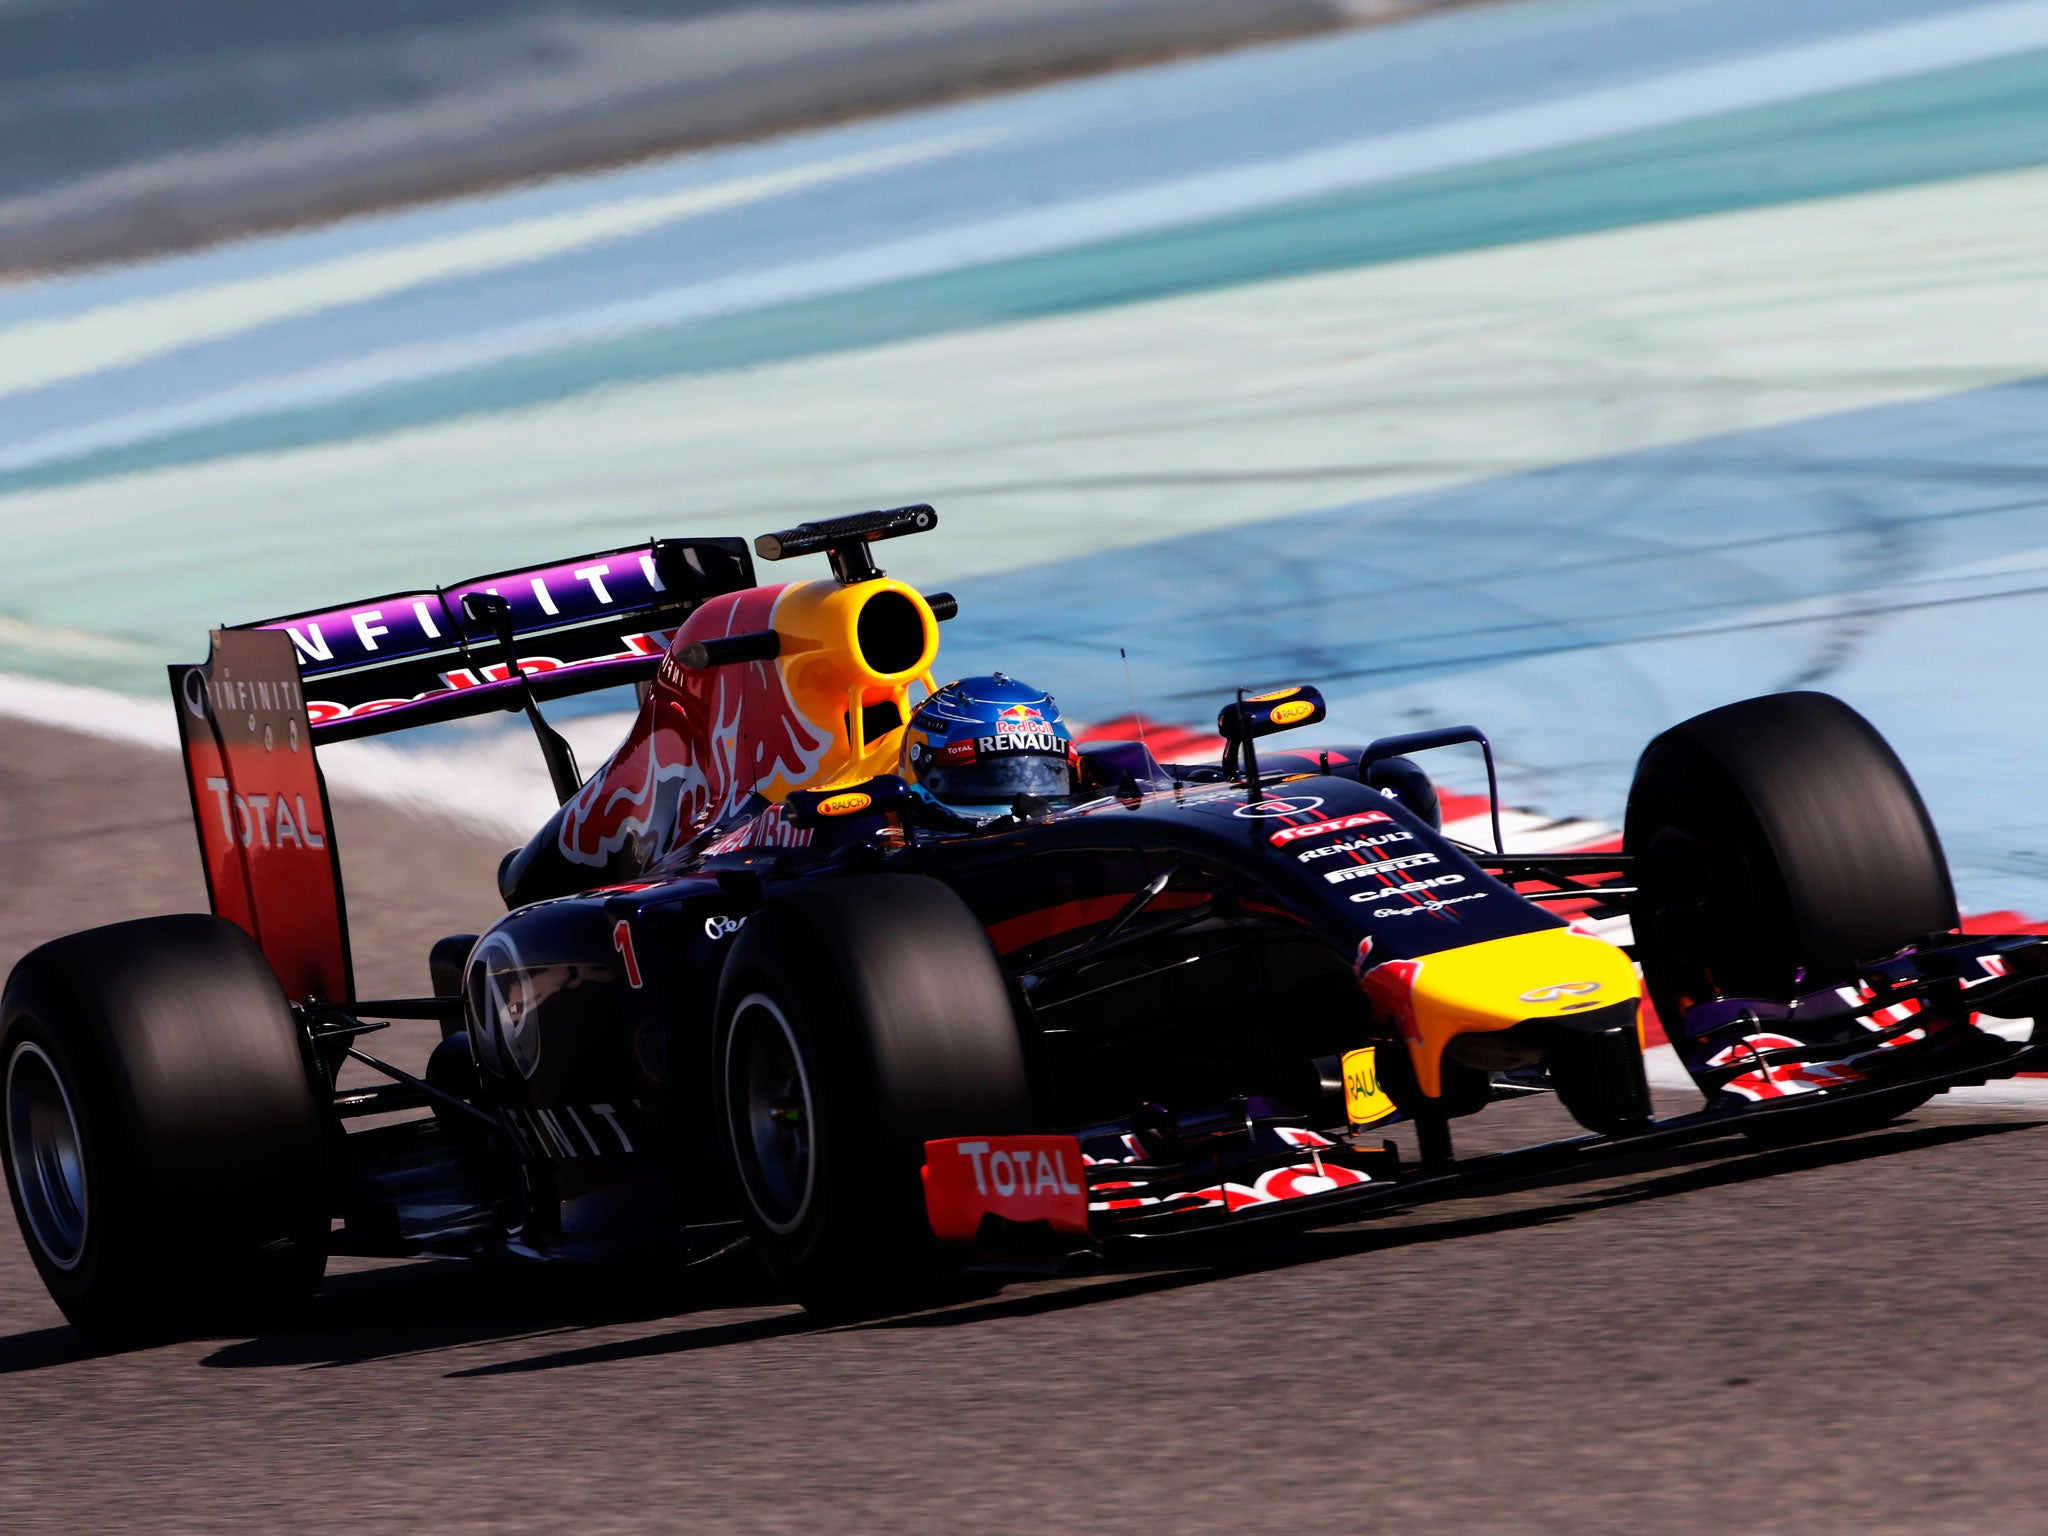 Sebastian Vettel in action behind the wheel of his Red Bull during testing at Bahrain